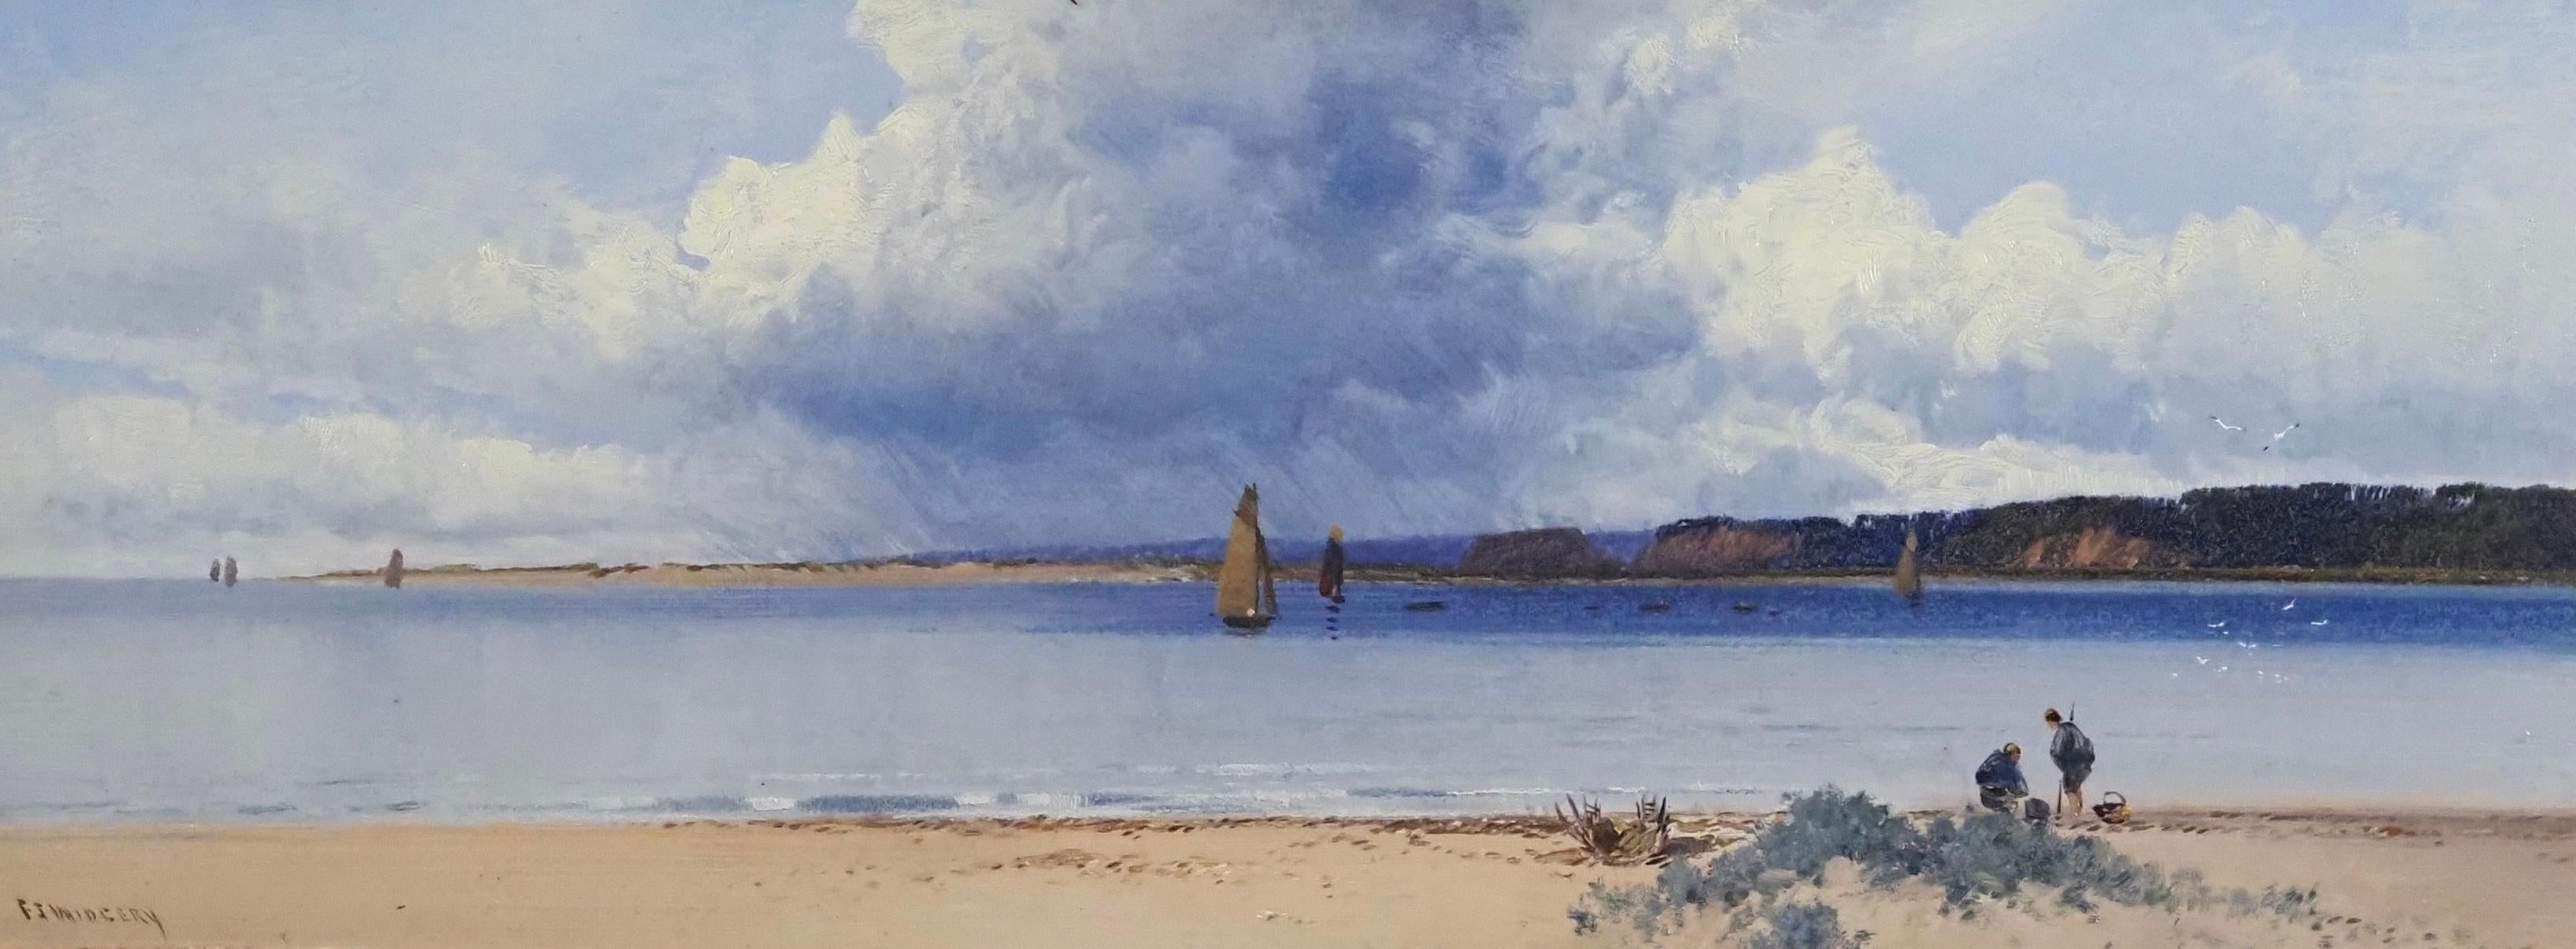 Dawlish Warren from the Exmouth Shore - Painting by Frederick Widgery